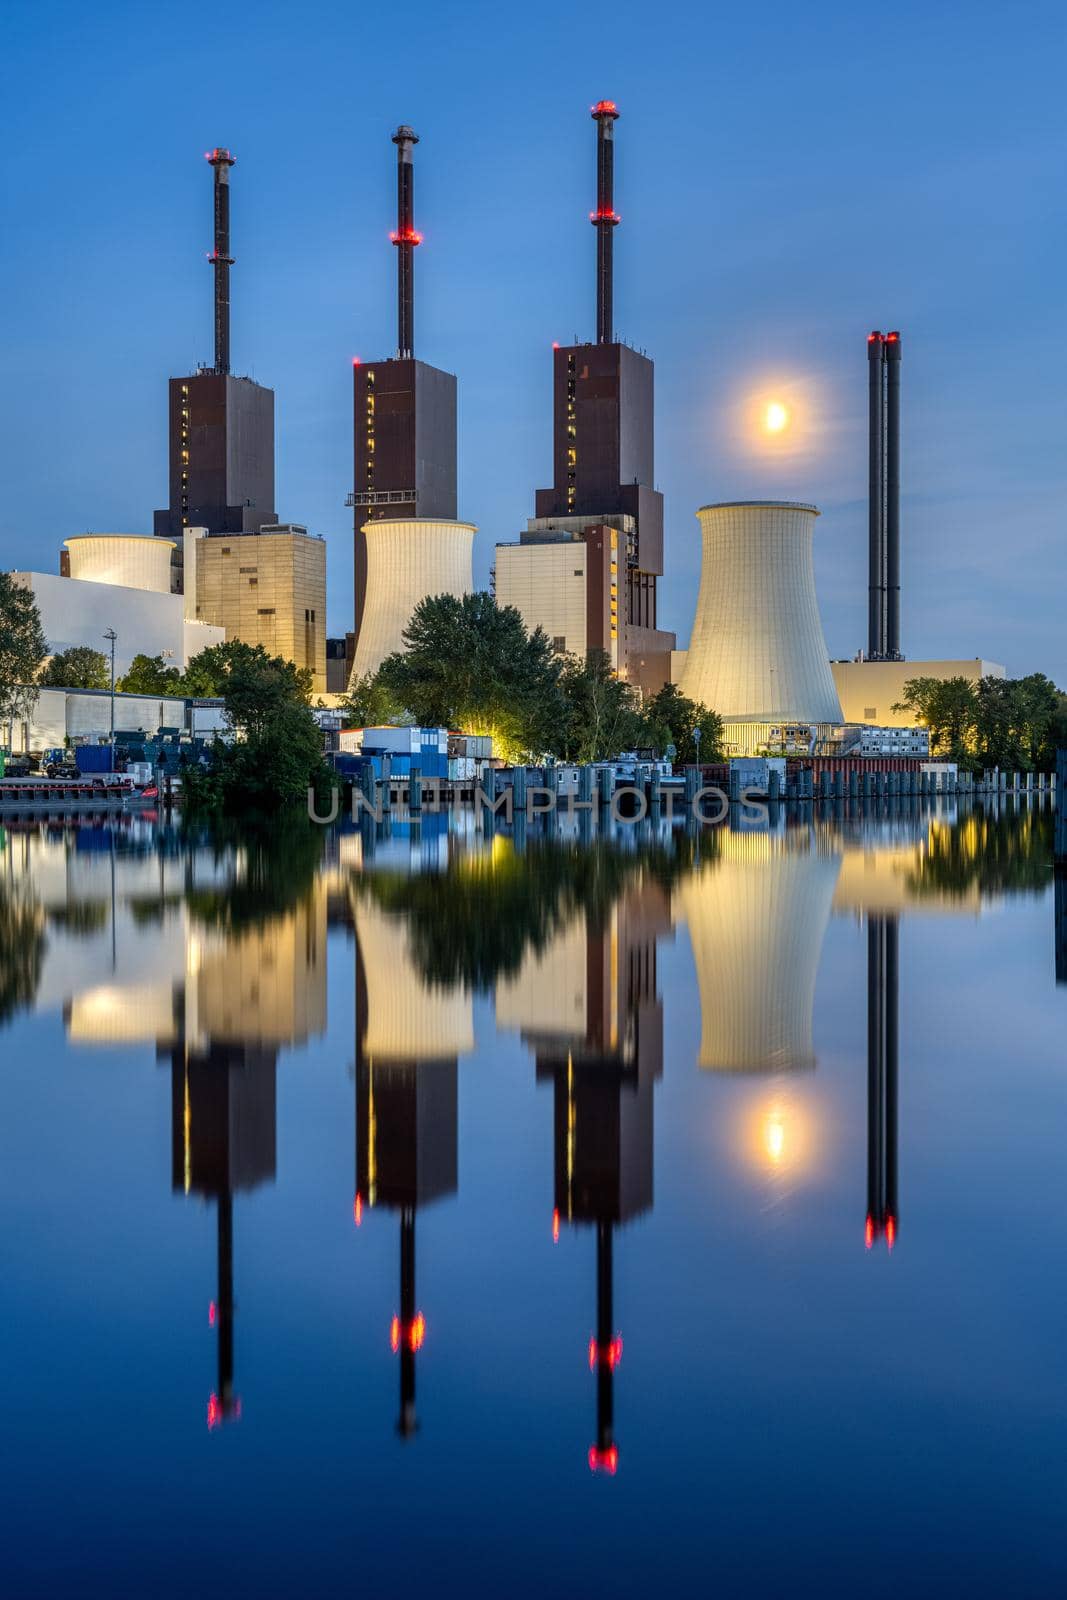 A thermal power station in Berlin at dusk by elxeneize